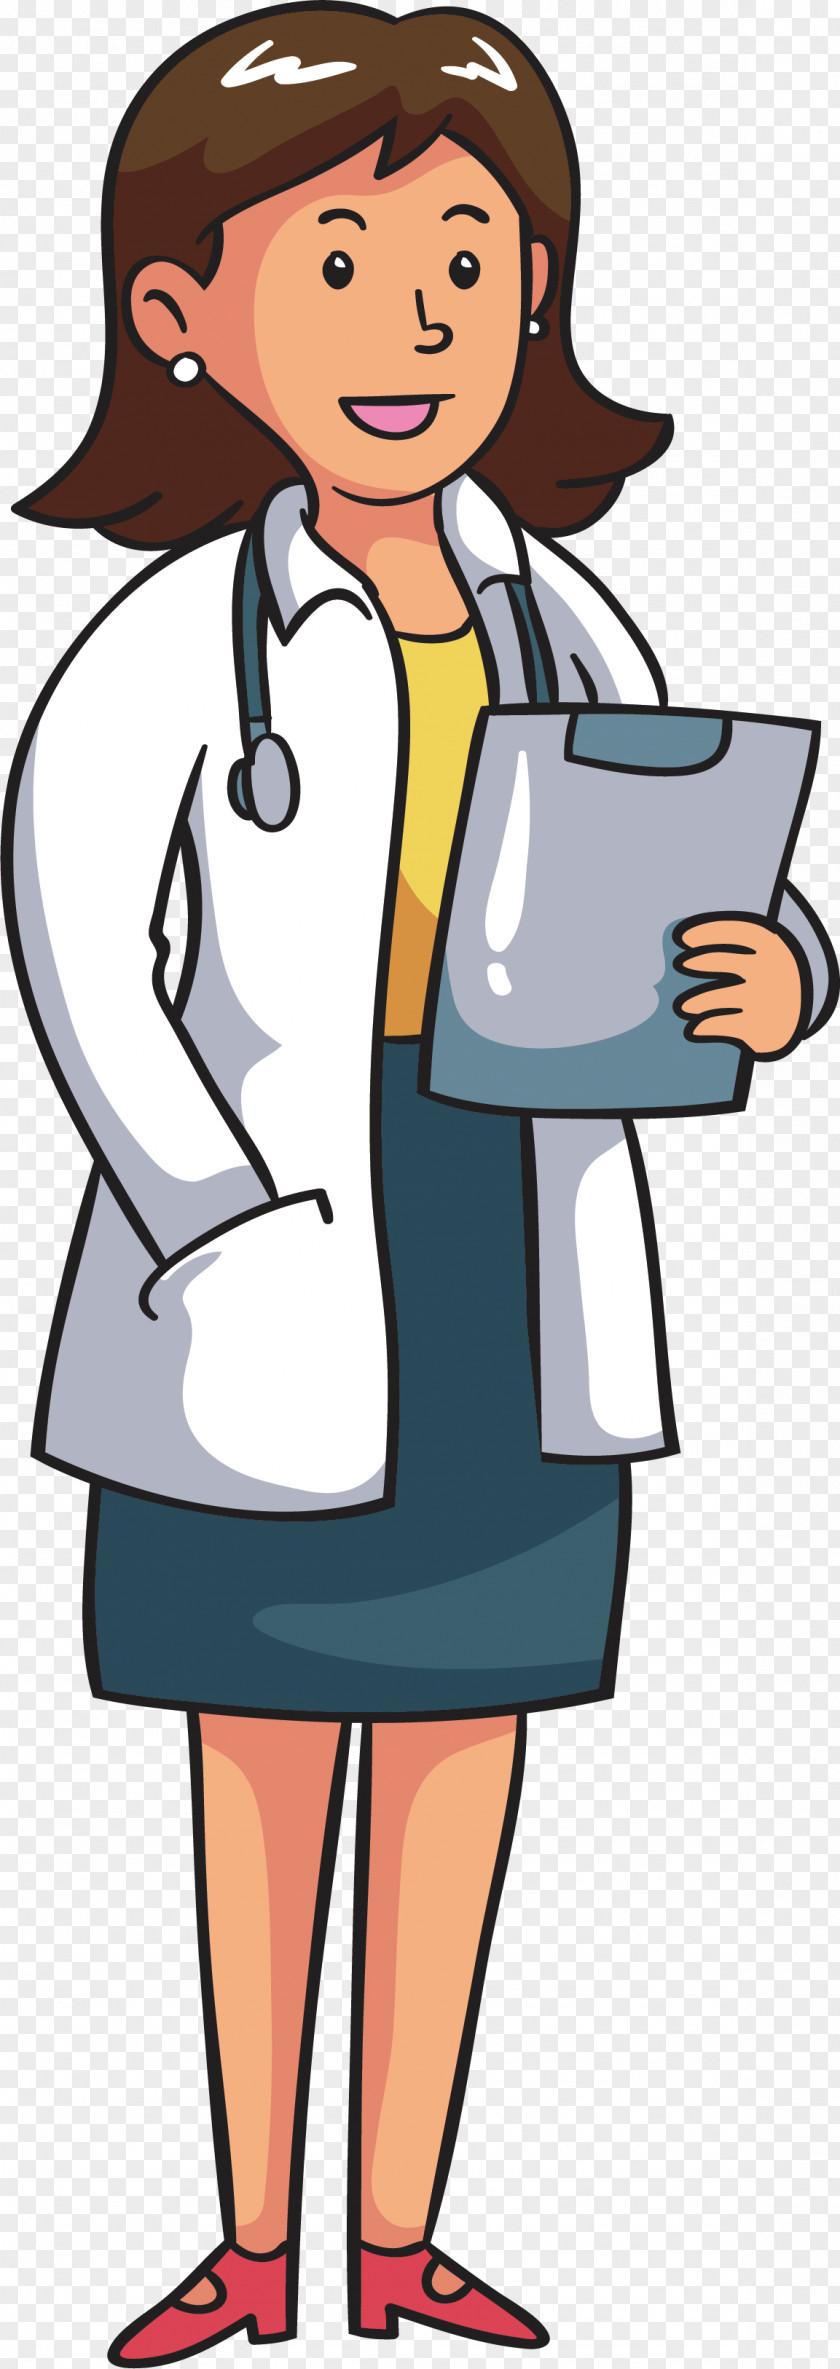 A Doctor Who Looks At Medical Record Physician Clip Art PNG